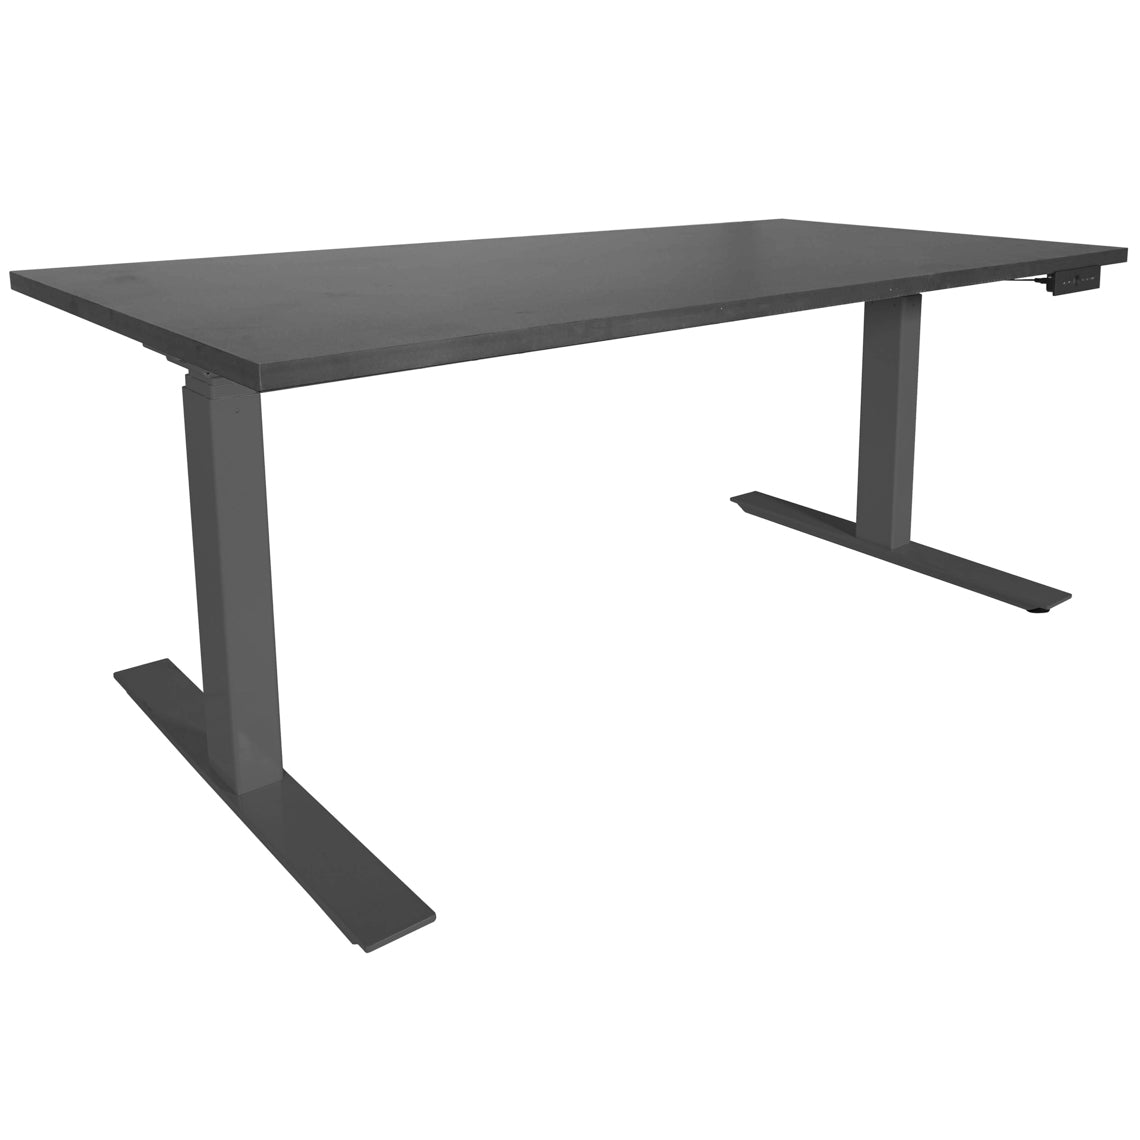 A6 Adjustable Sit To Stand Desk 24"- 50" w/ Black 30" x 48" Top - view 4